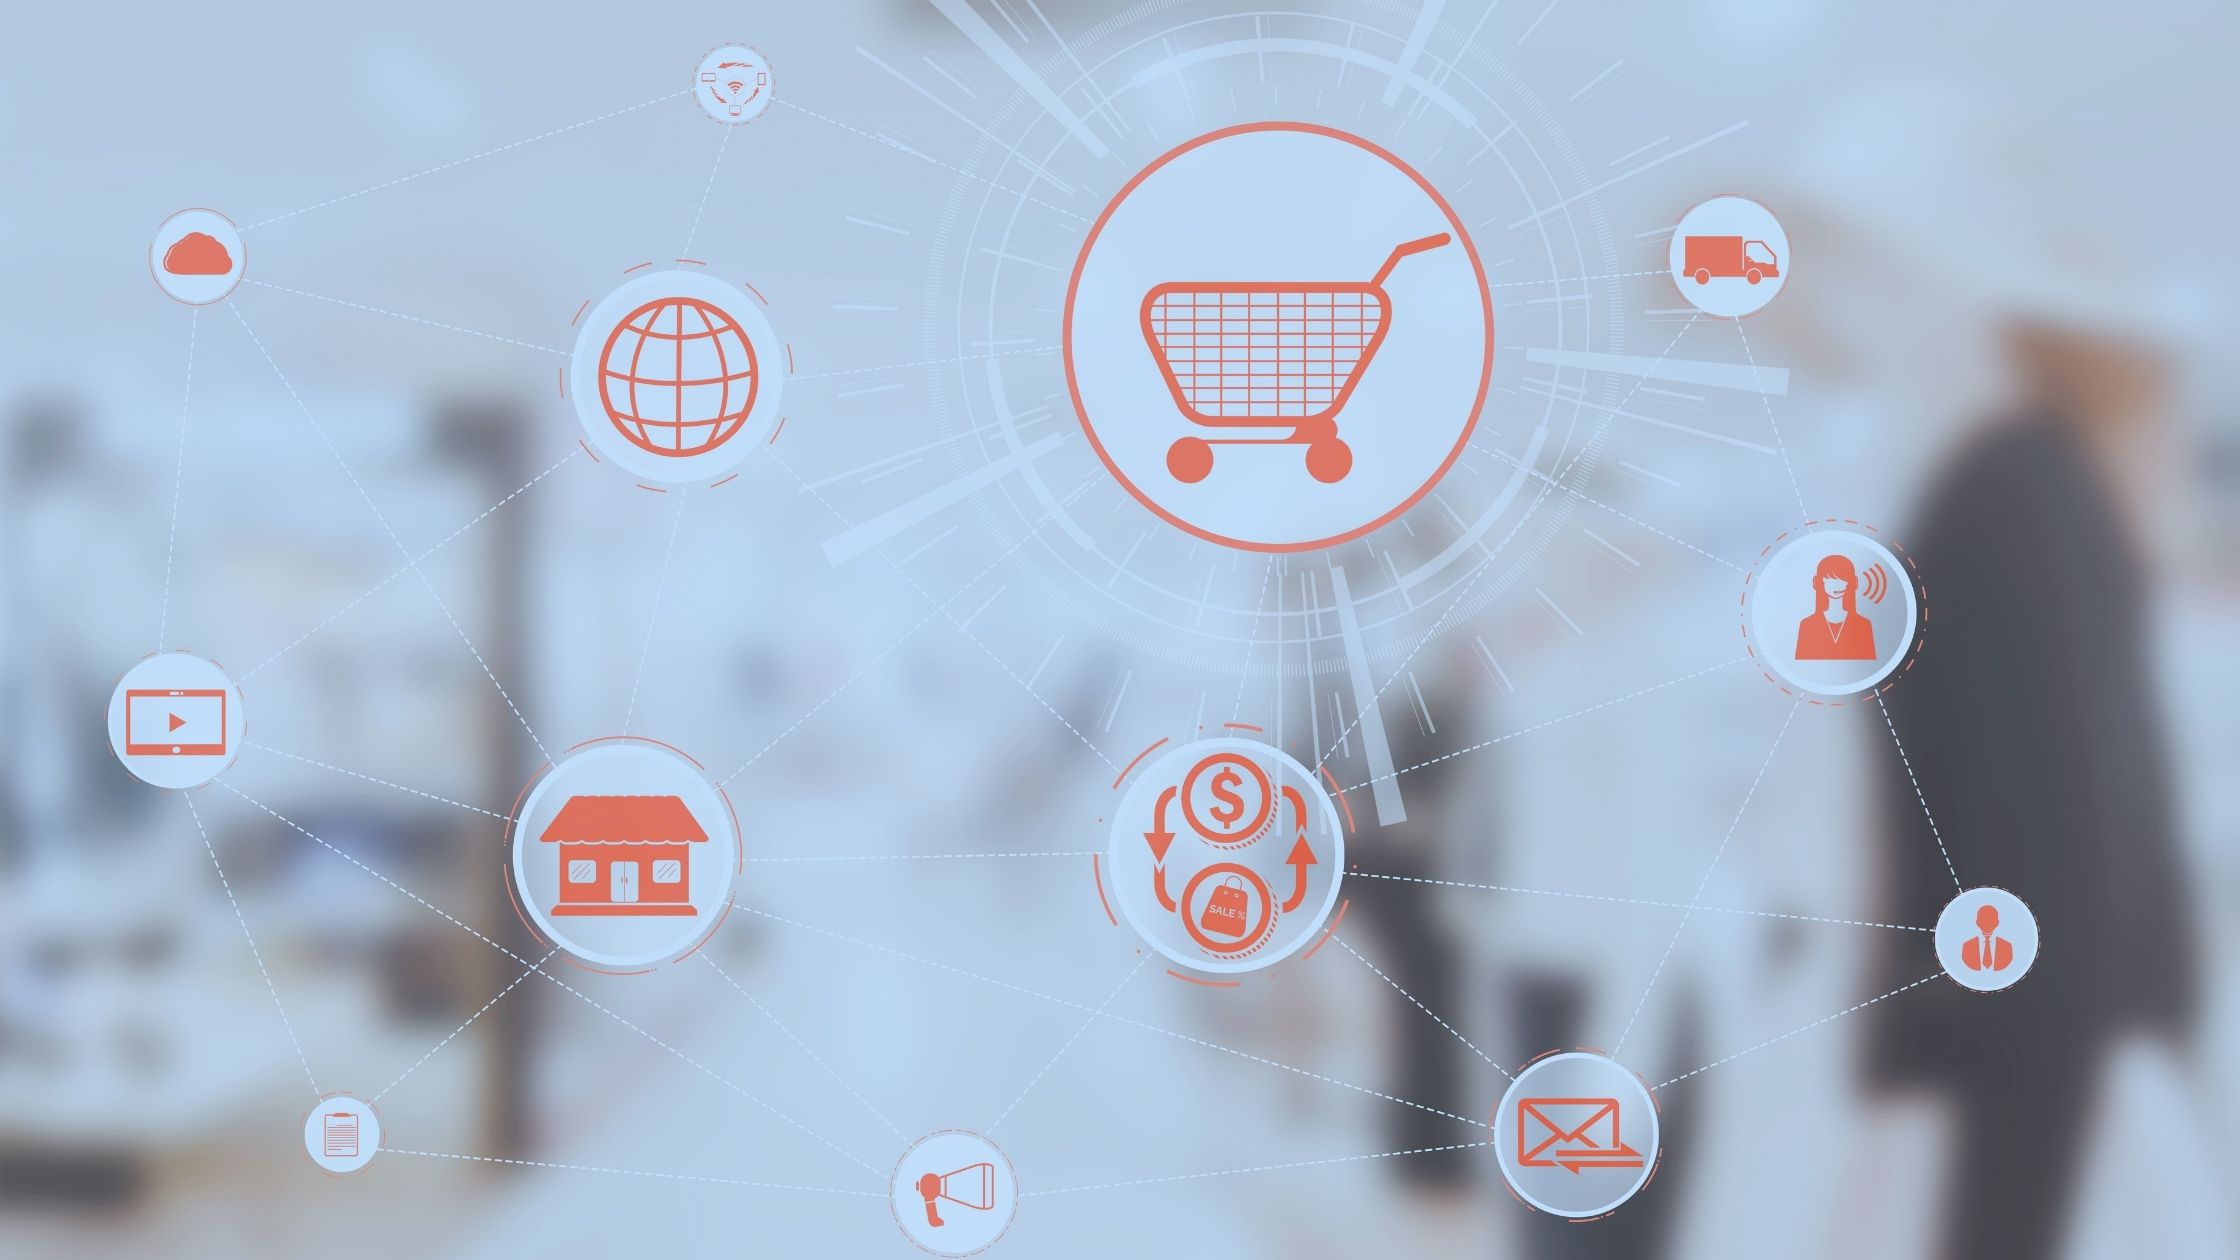 Decision Intelligence powers the future of retail ecosystem